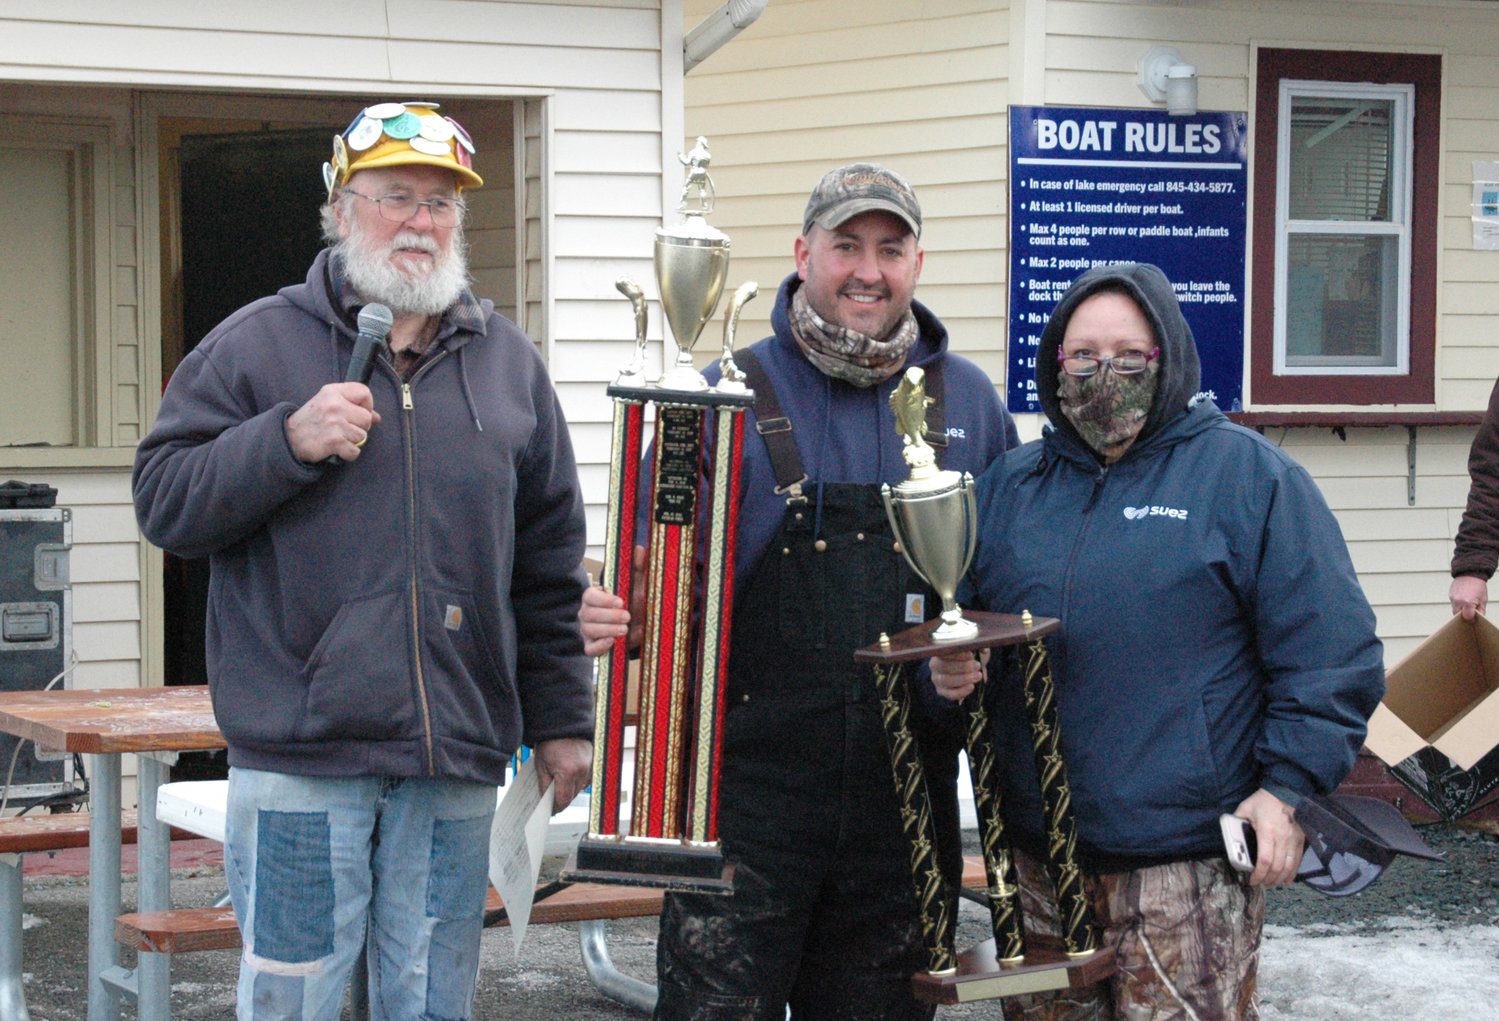 Thomas Carney (center) is presented with the first place trophy for Tappan Fire Department after winning the ice fishing contest. Event organizer, J.W. Halchak (left), presented the award.